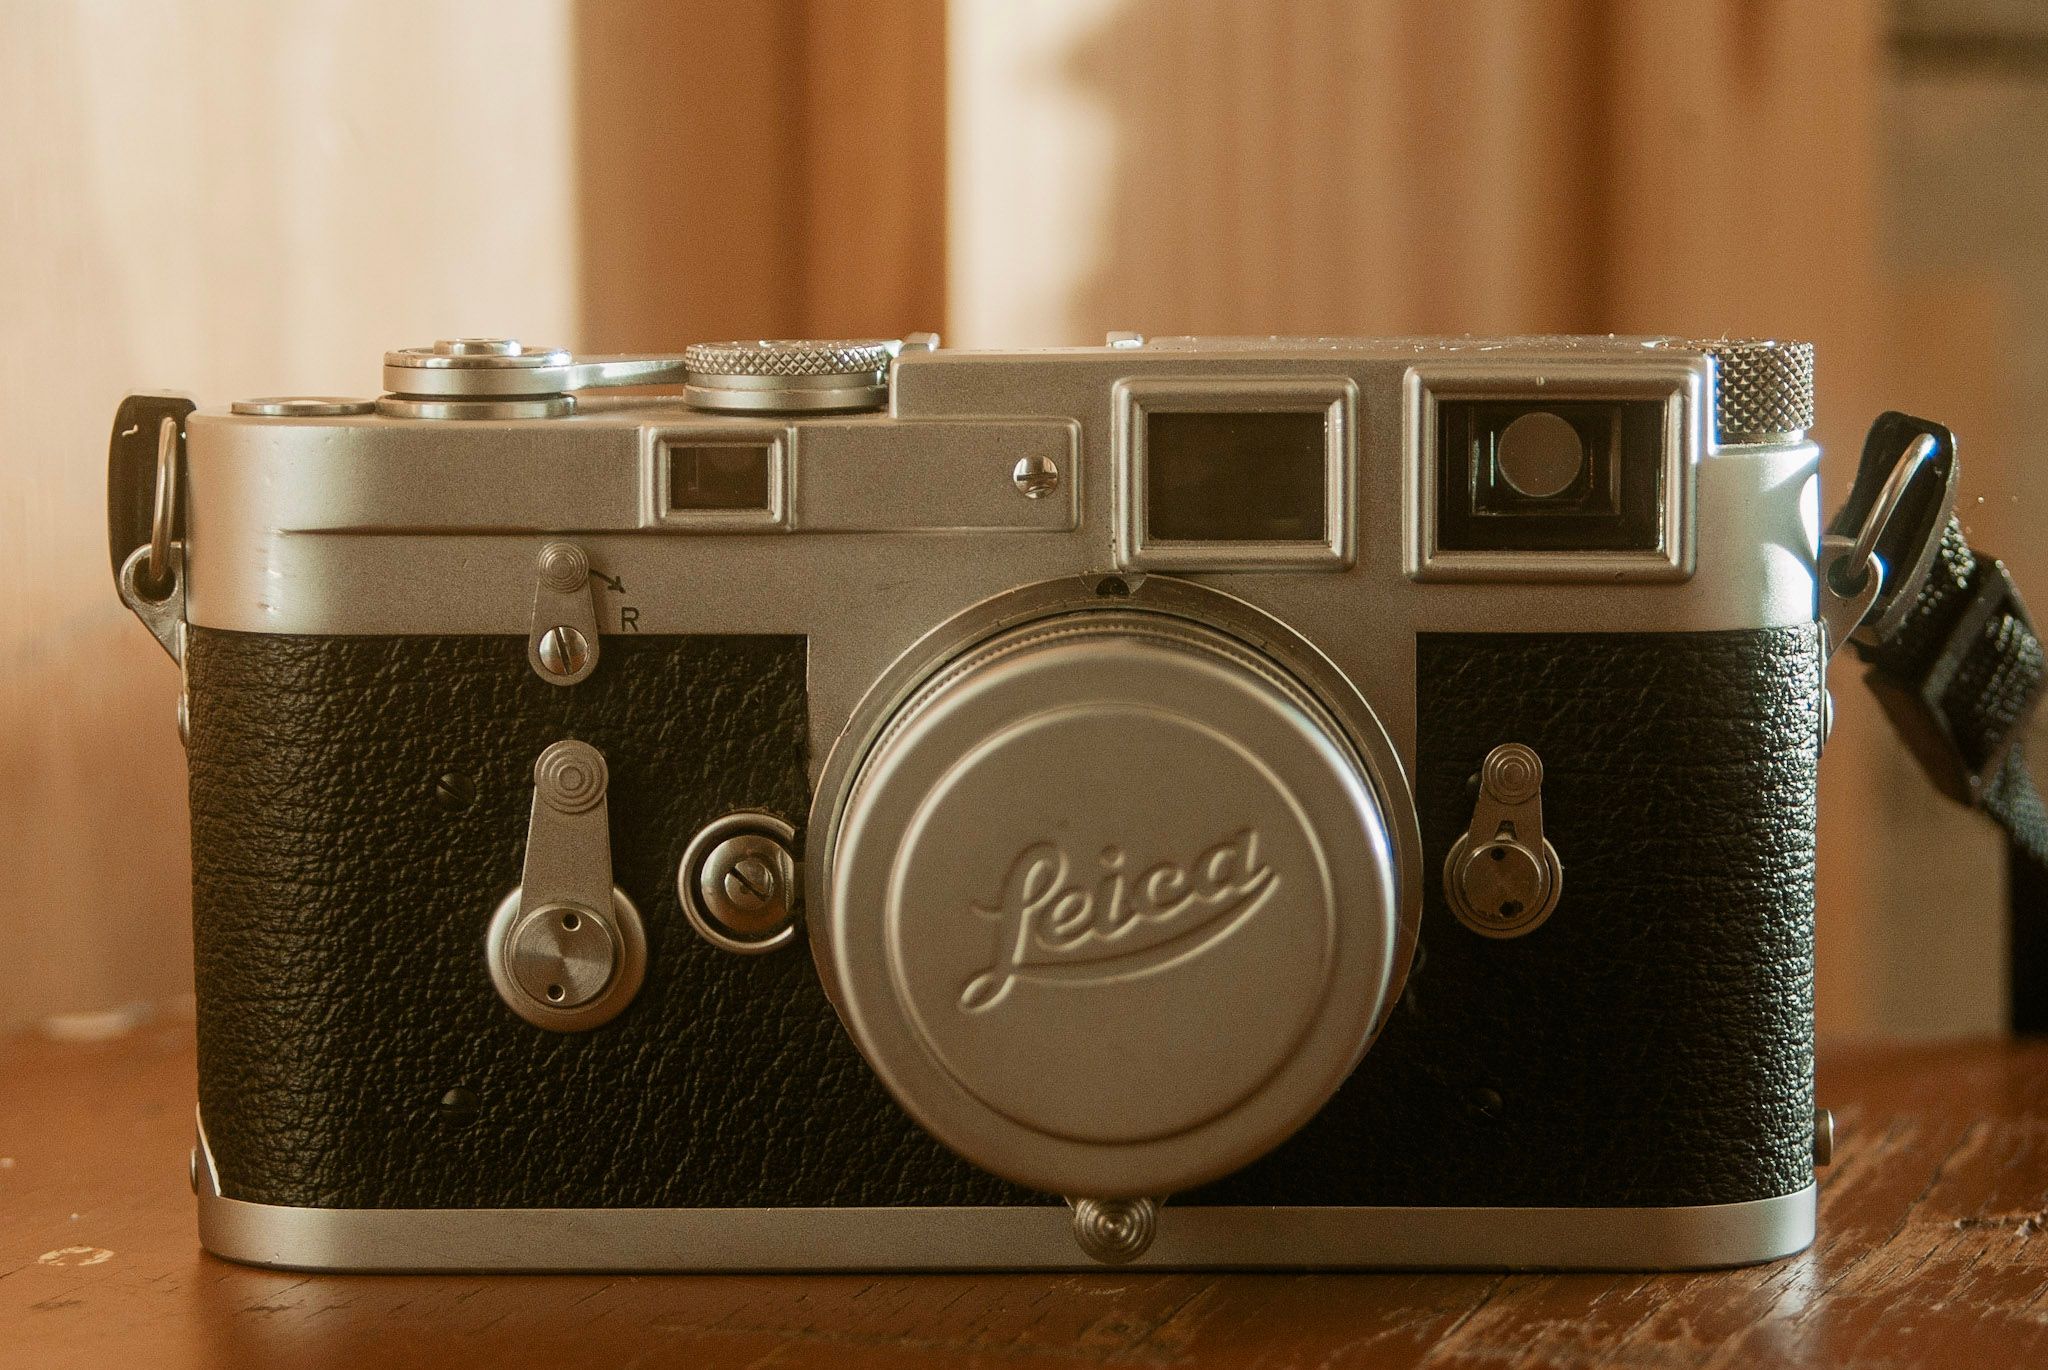 The new black-and-white Leica does things color cameras can't